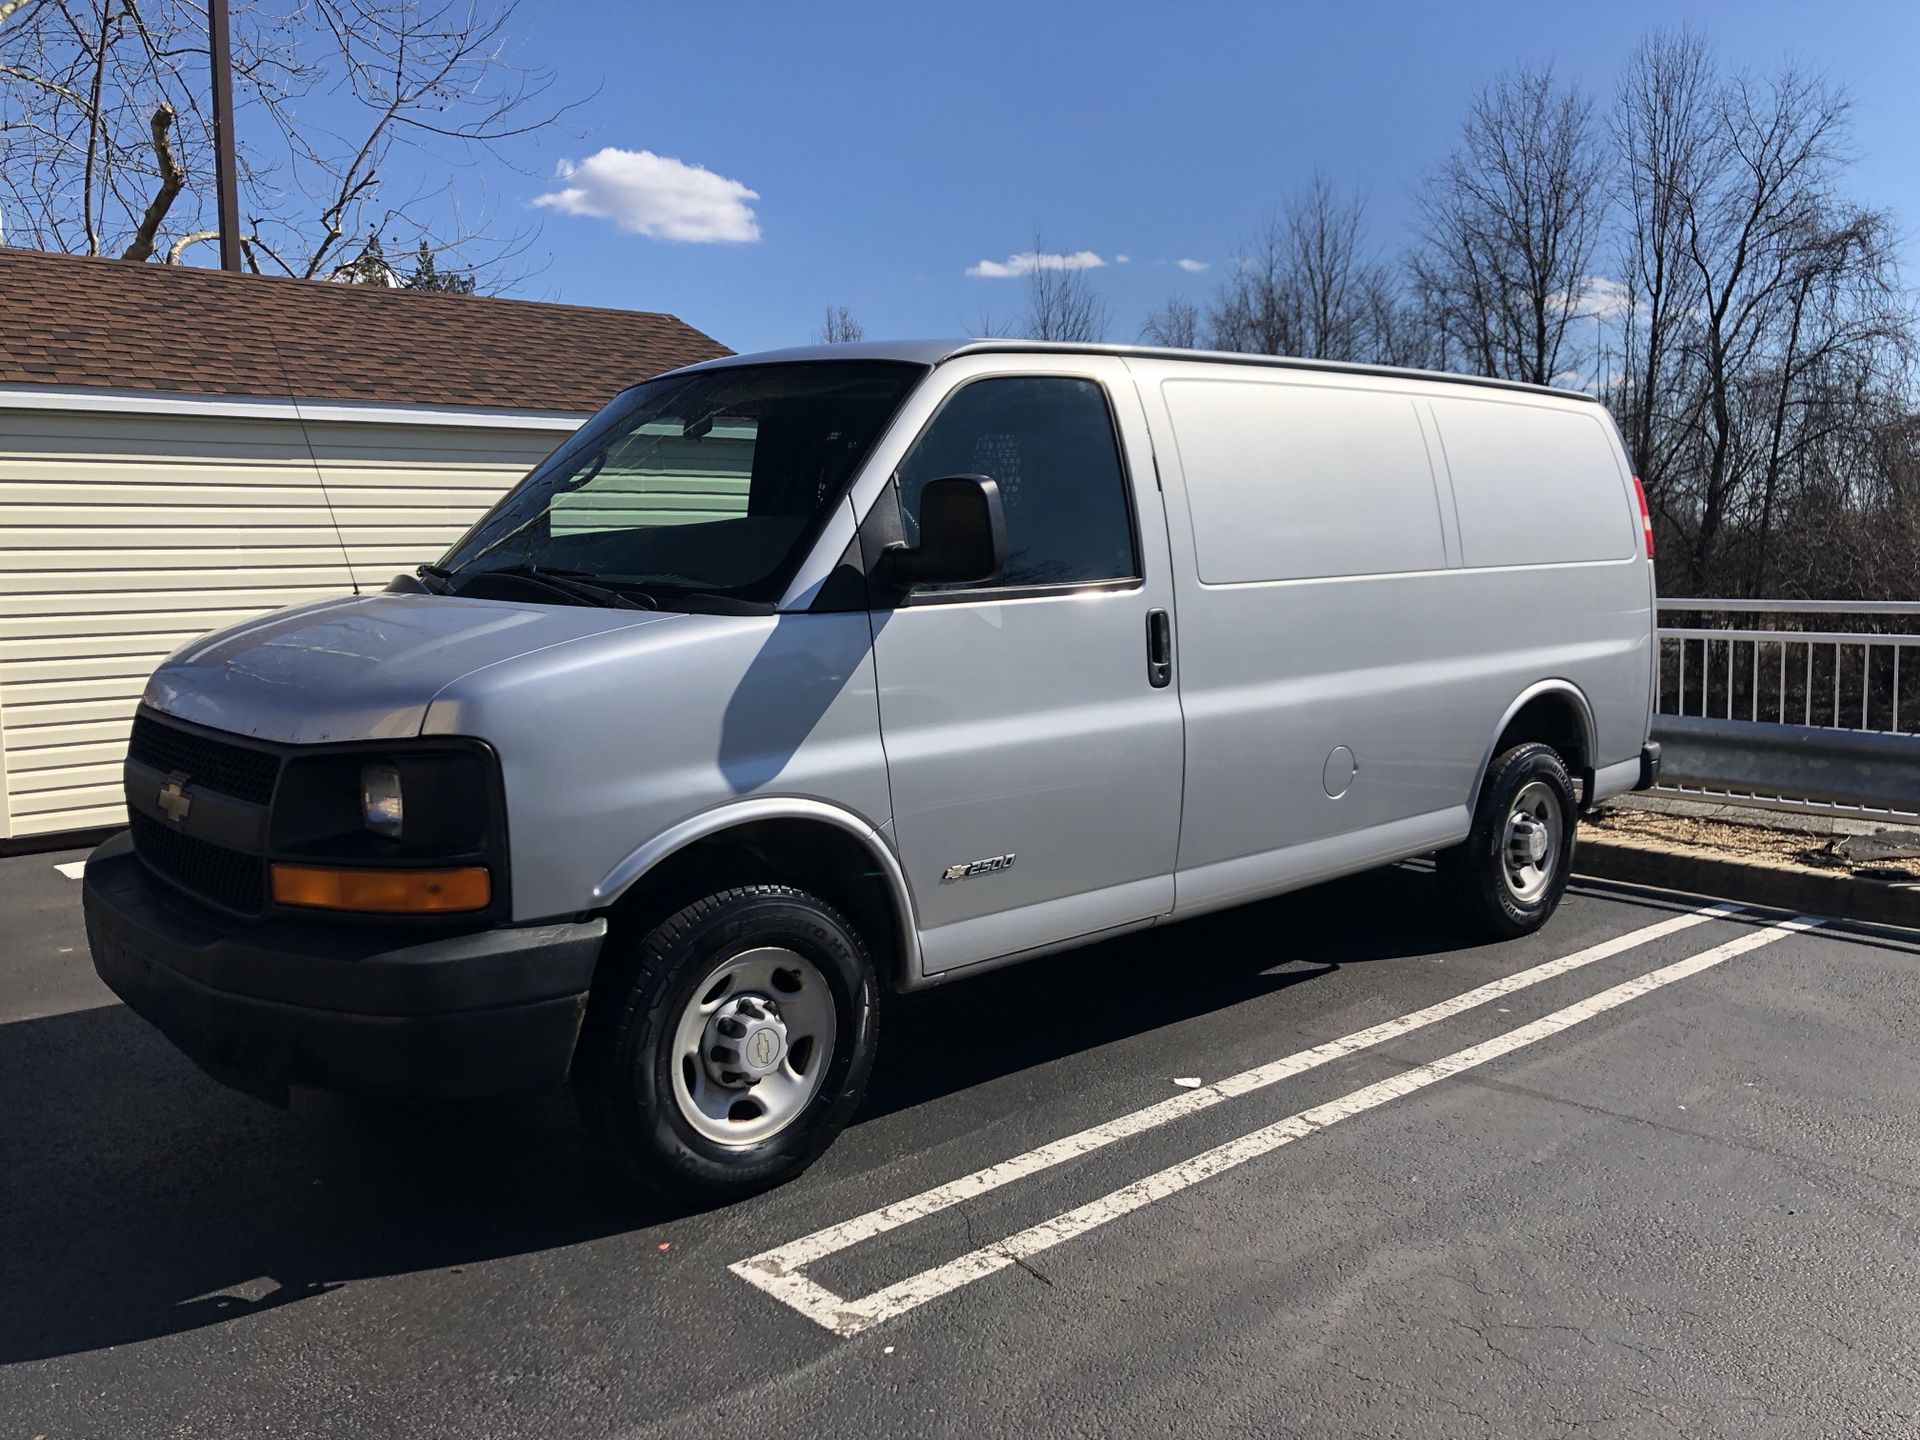 2007 Chevy express 2500 cargo van looks and runs like new everything works perfect new tires and brakes very clean inside and out 125k Miles